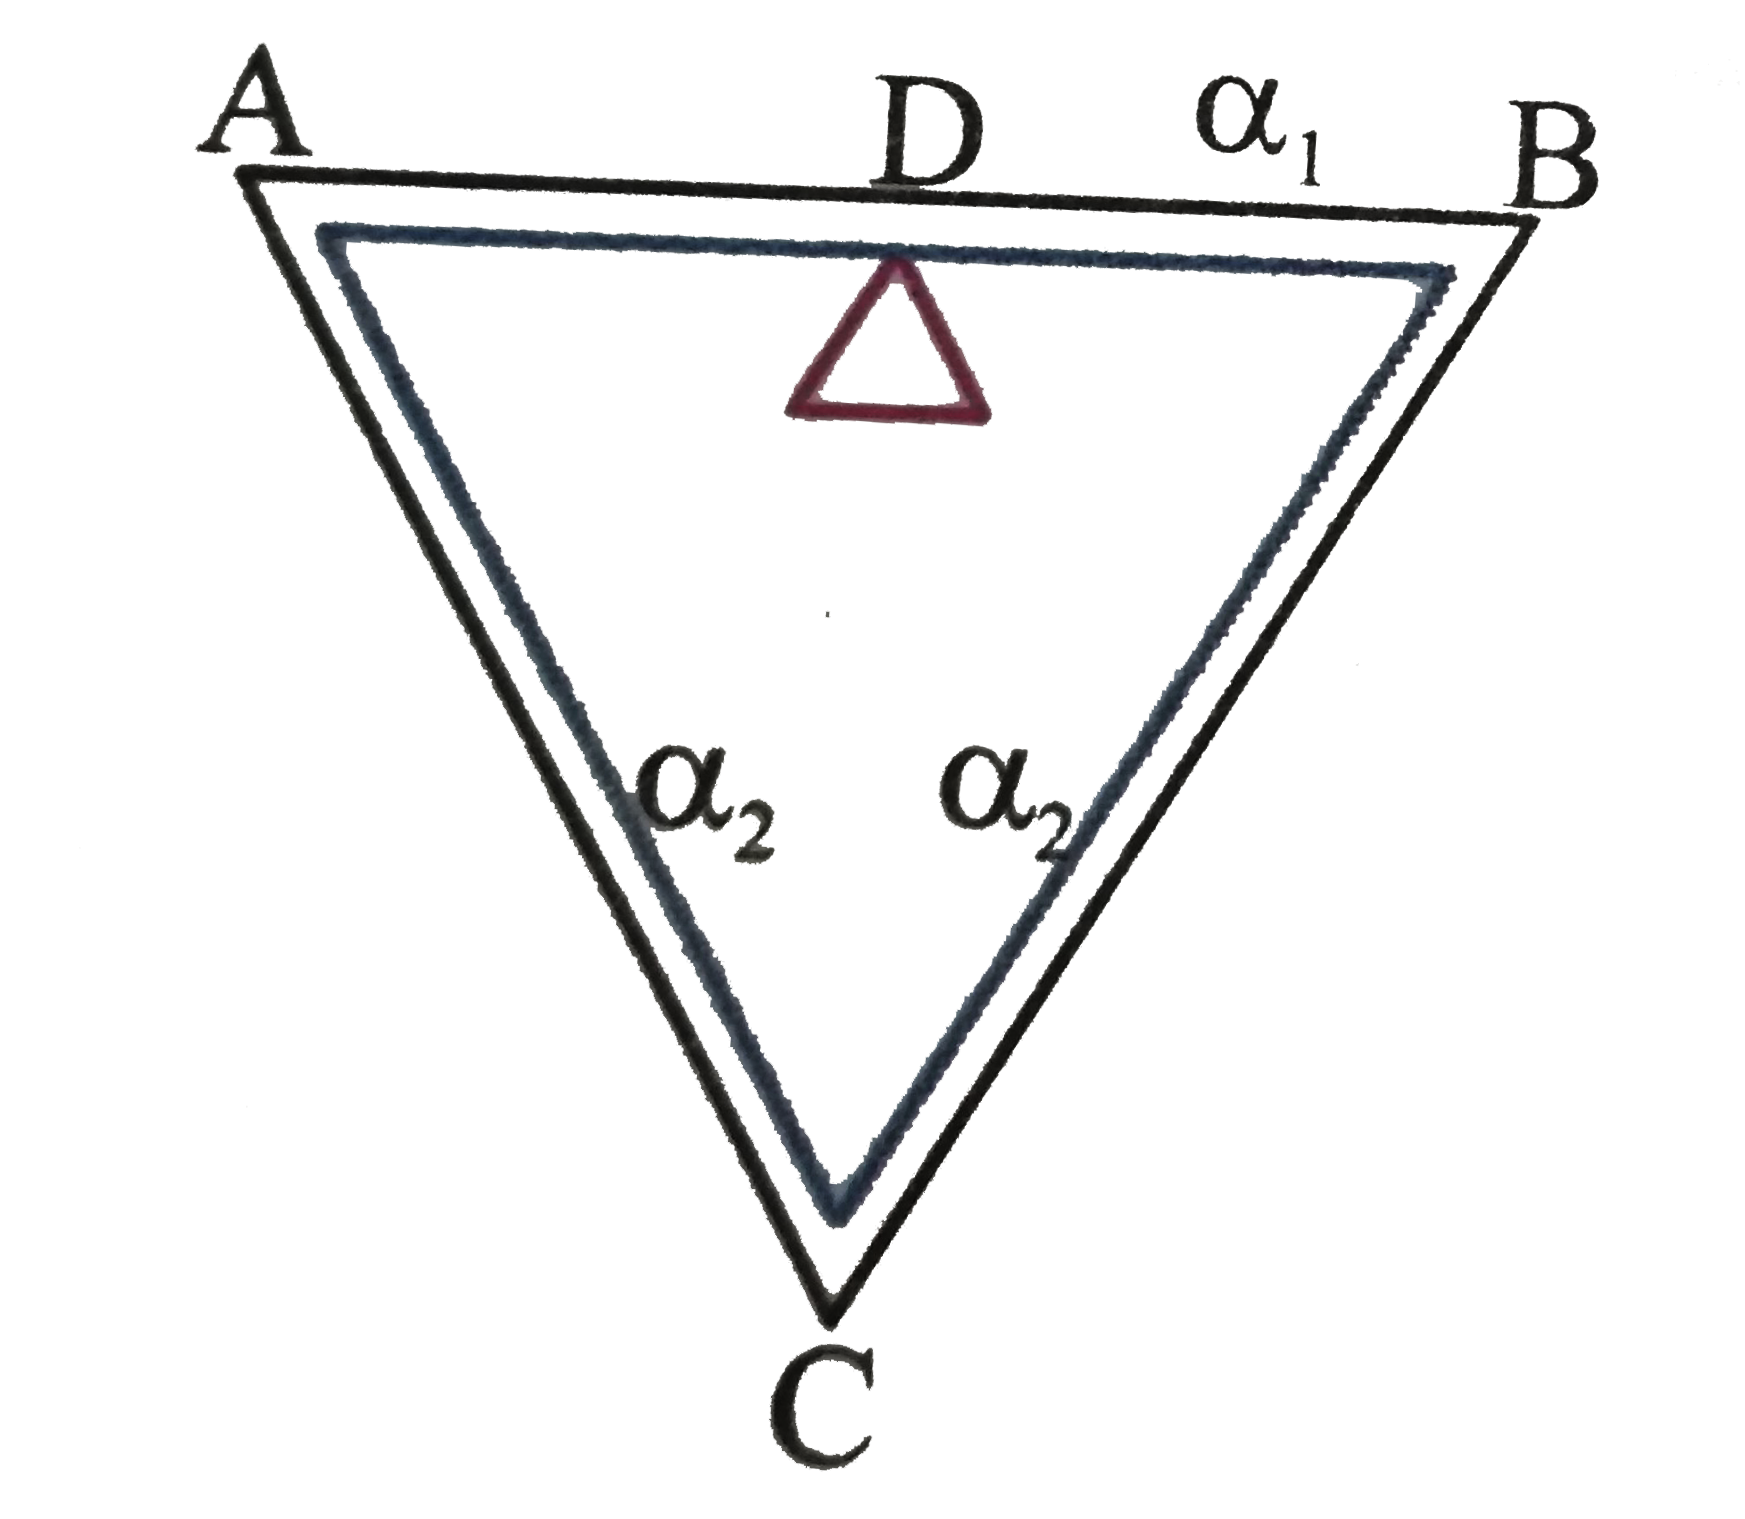 An equilateral triangle ABC is formed by joining three rods of equal length and D is the mid-point of AB. The coefficient of linear expansion for AB is alpha(1) and for AC and BC is alpha(2). The relation between alpha(1) and alpha(2), if distance DC remains constant for small changes in temperture is